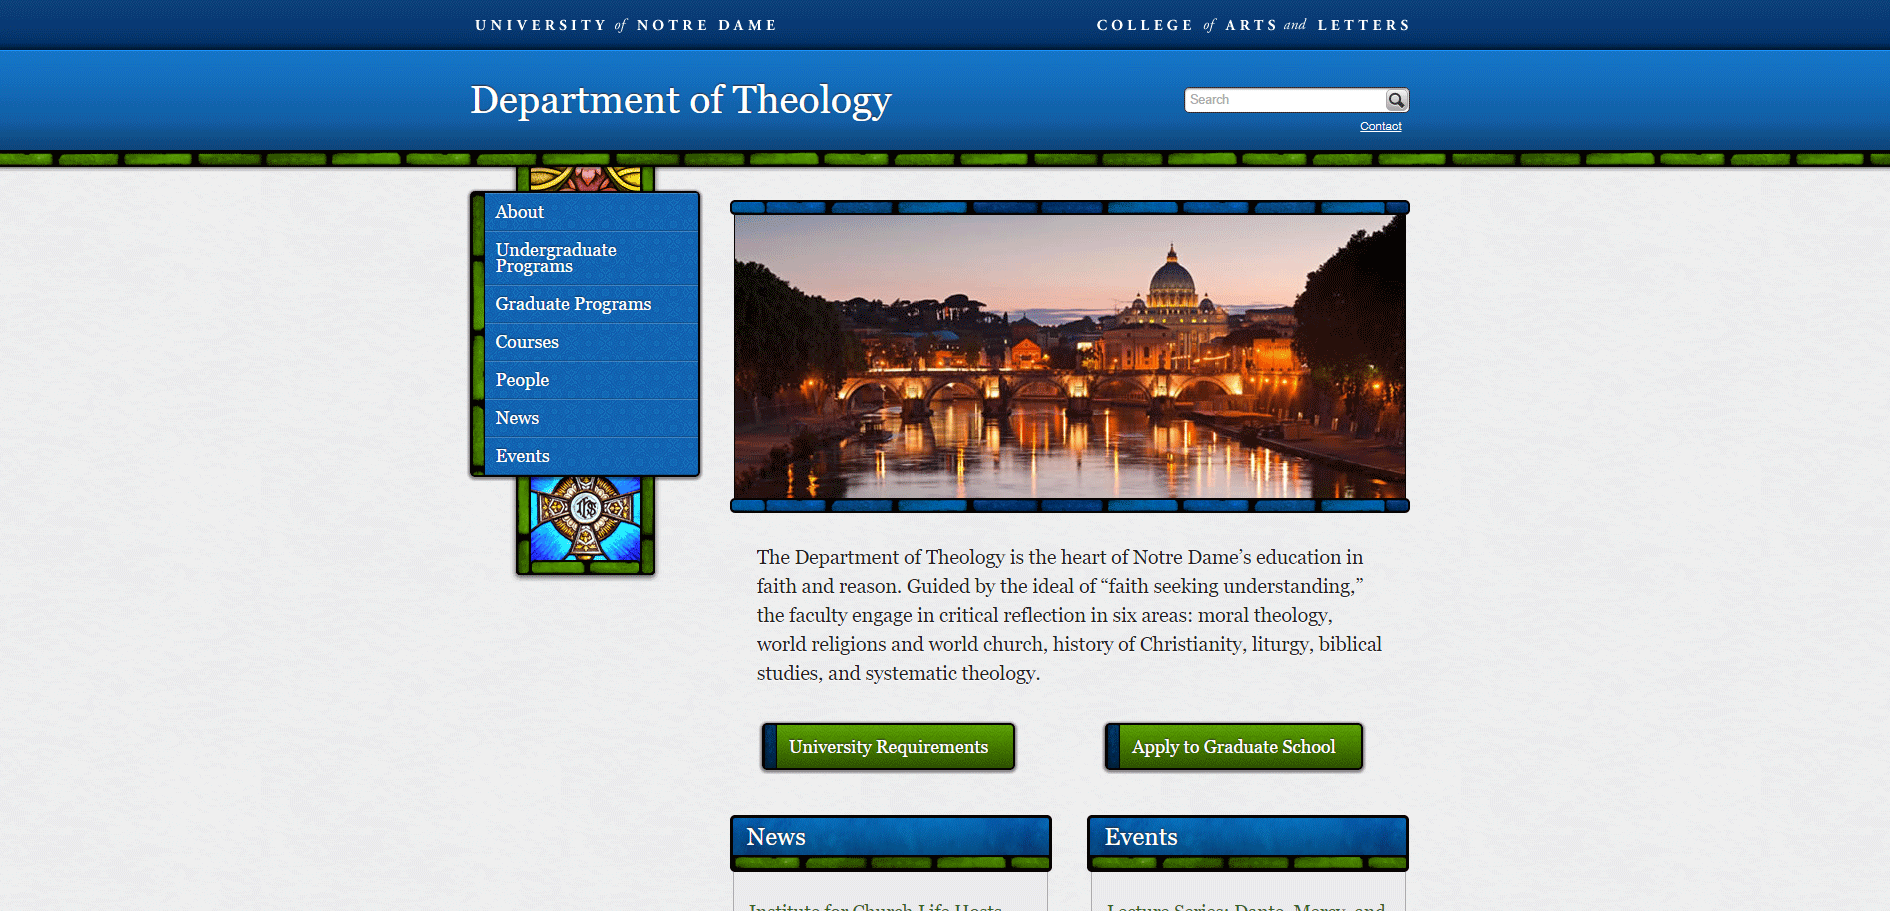 Top 20 Theological Schools or Seminaries - University of Notre Dame 